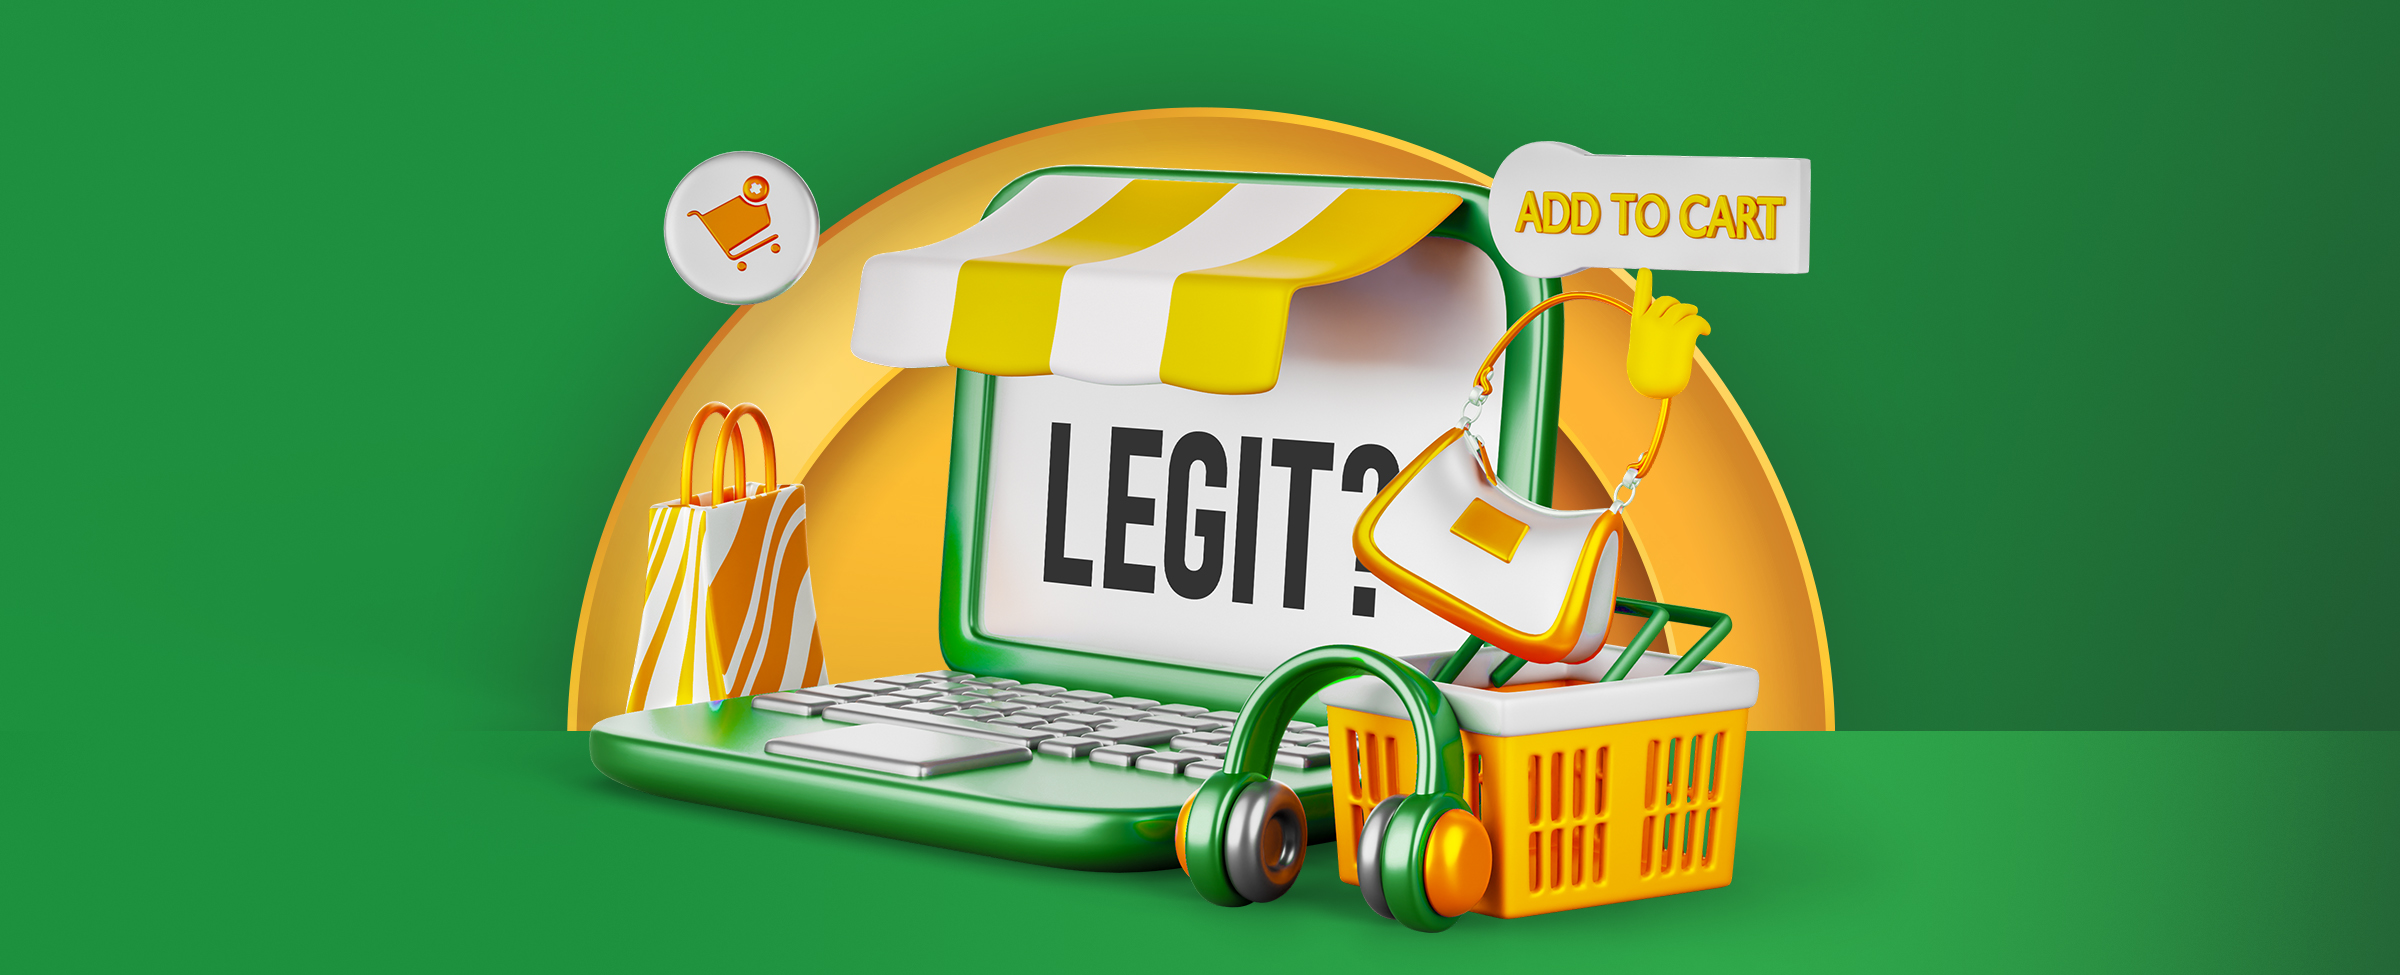 A laptop is centred with the screen displaying the text ‘Legit?’. Online shopping icons also feature. On a two-tone green background.